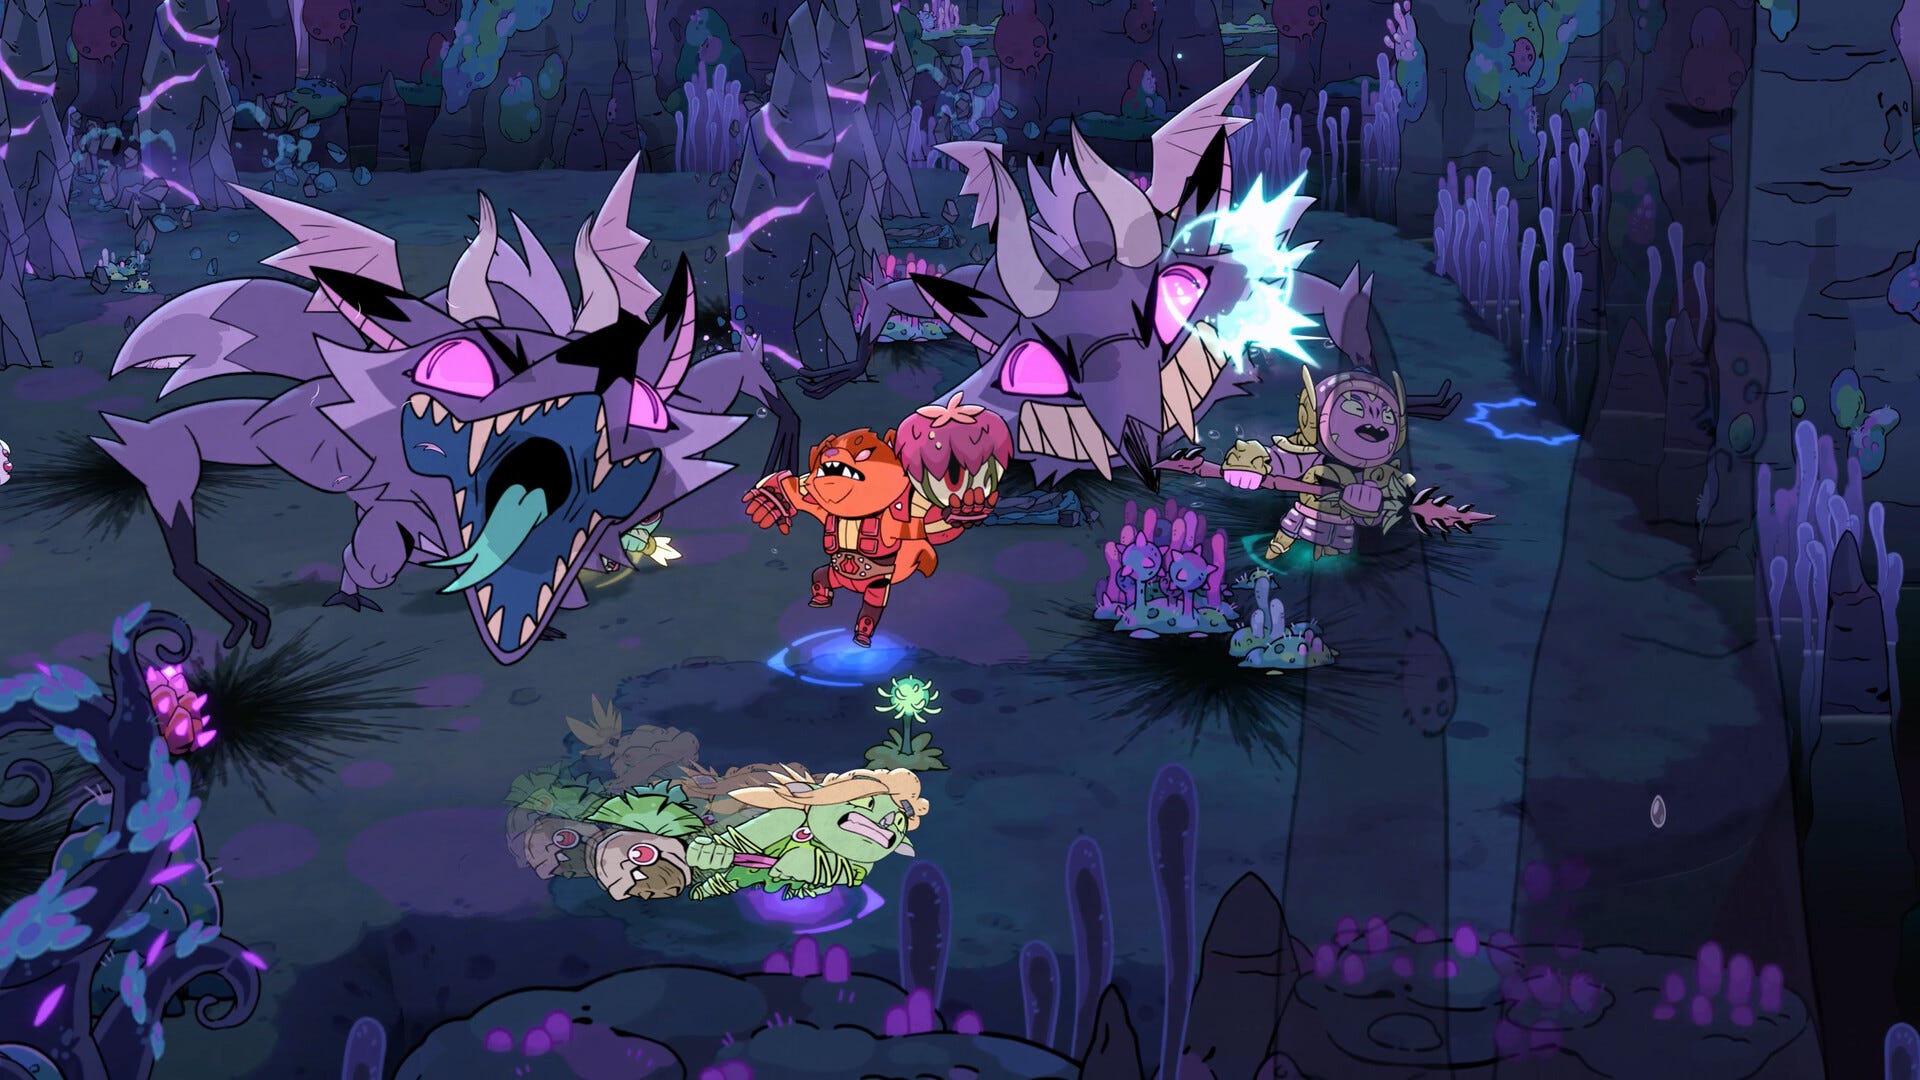 The Don't Starve devs' new cutesy co-cop dungeon crawler is out in early access today